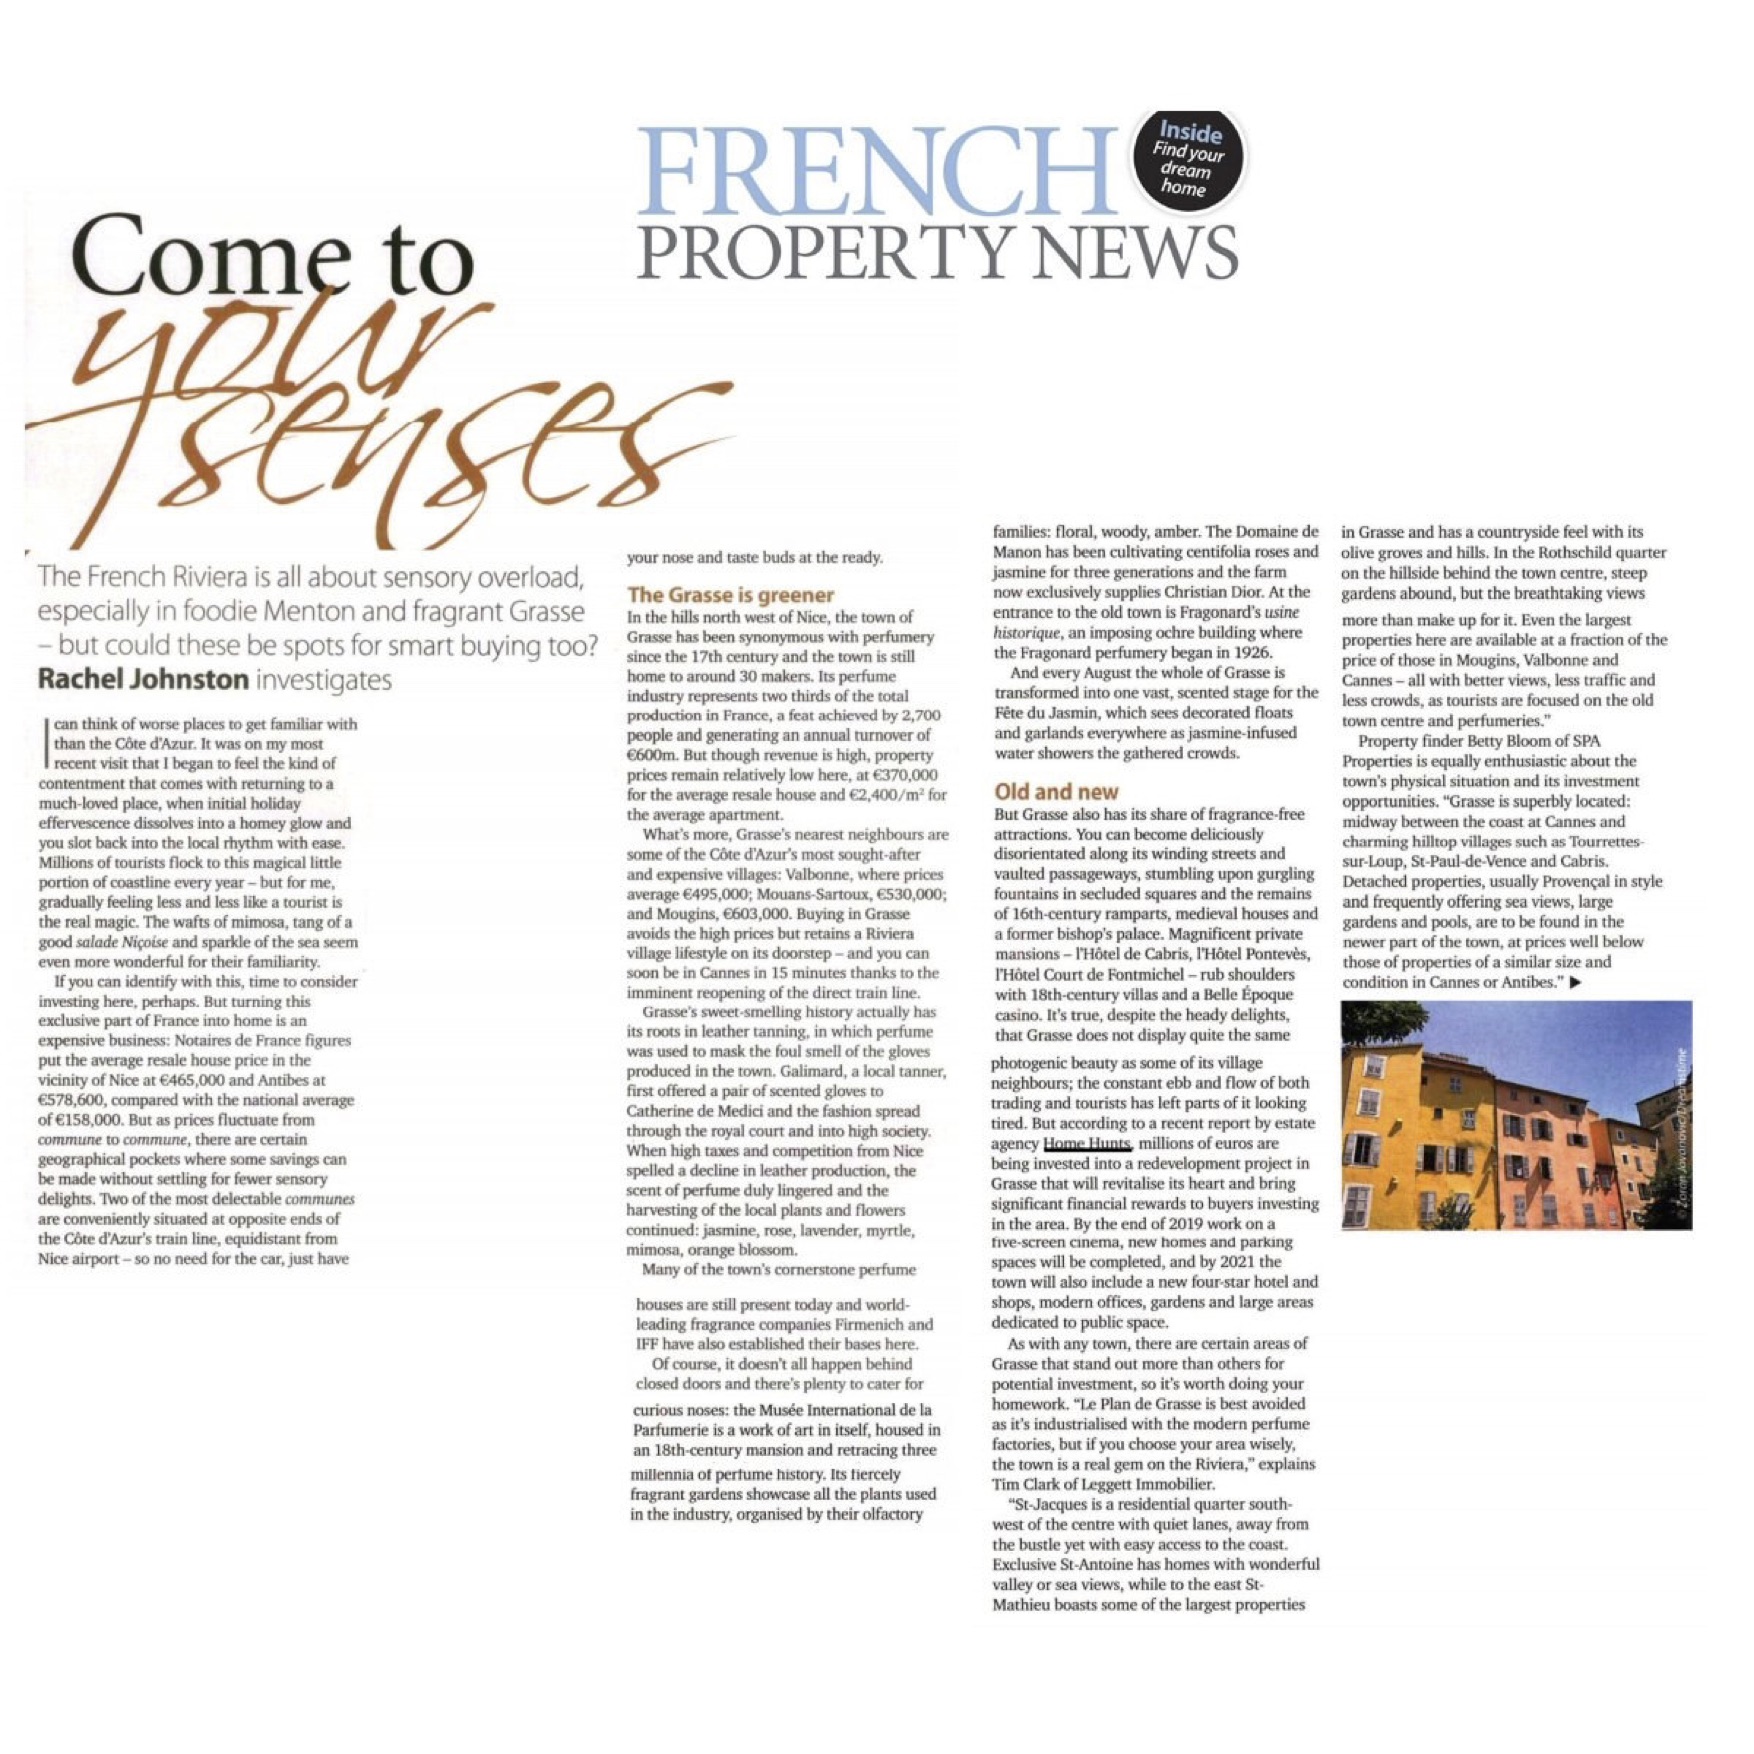 French Property News – The Grasse is greener